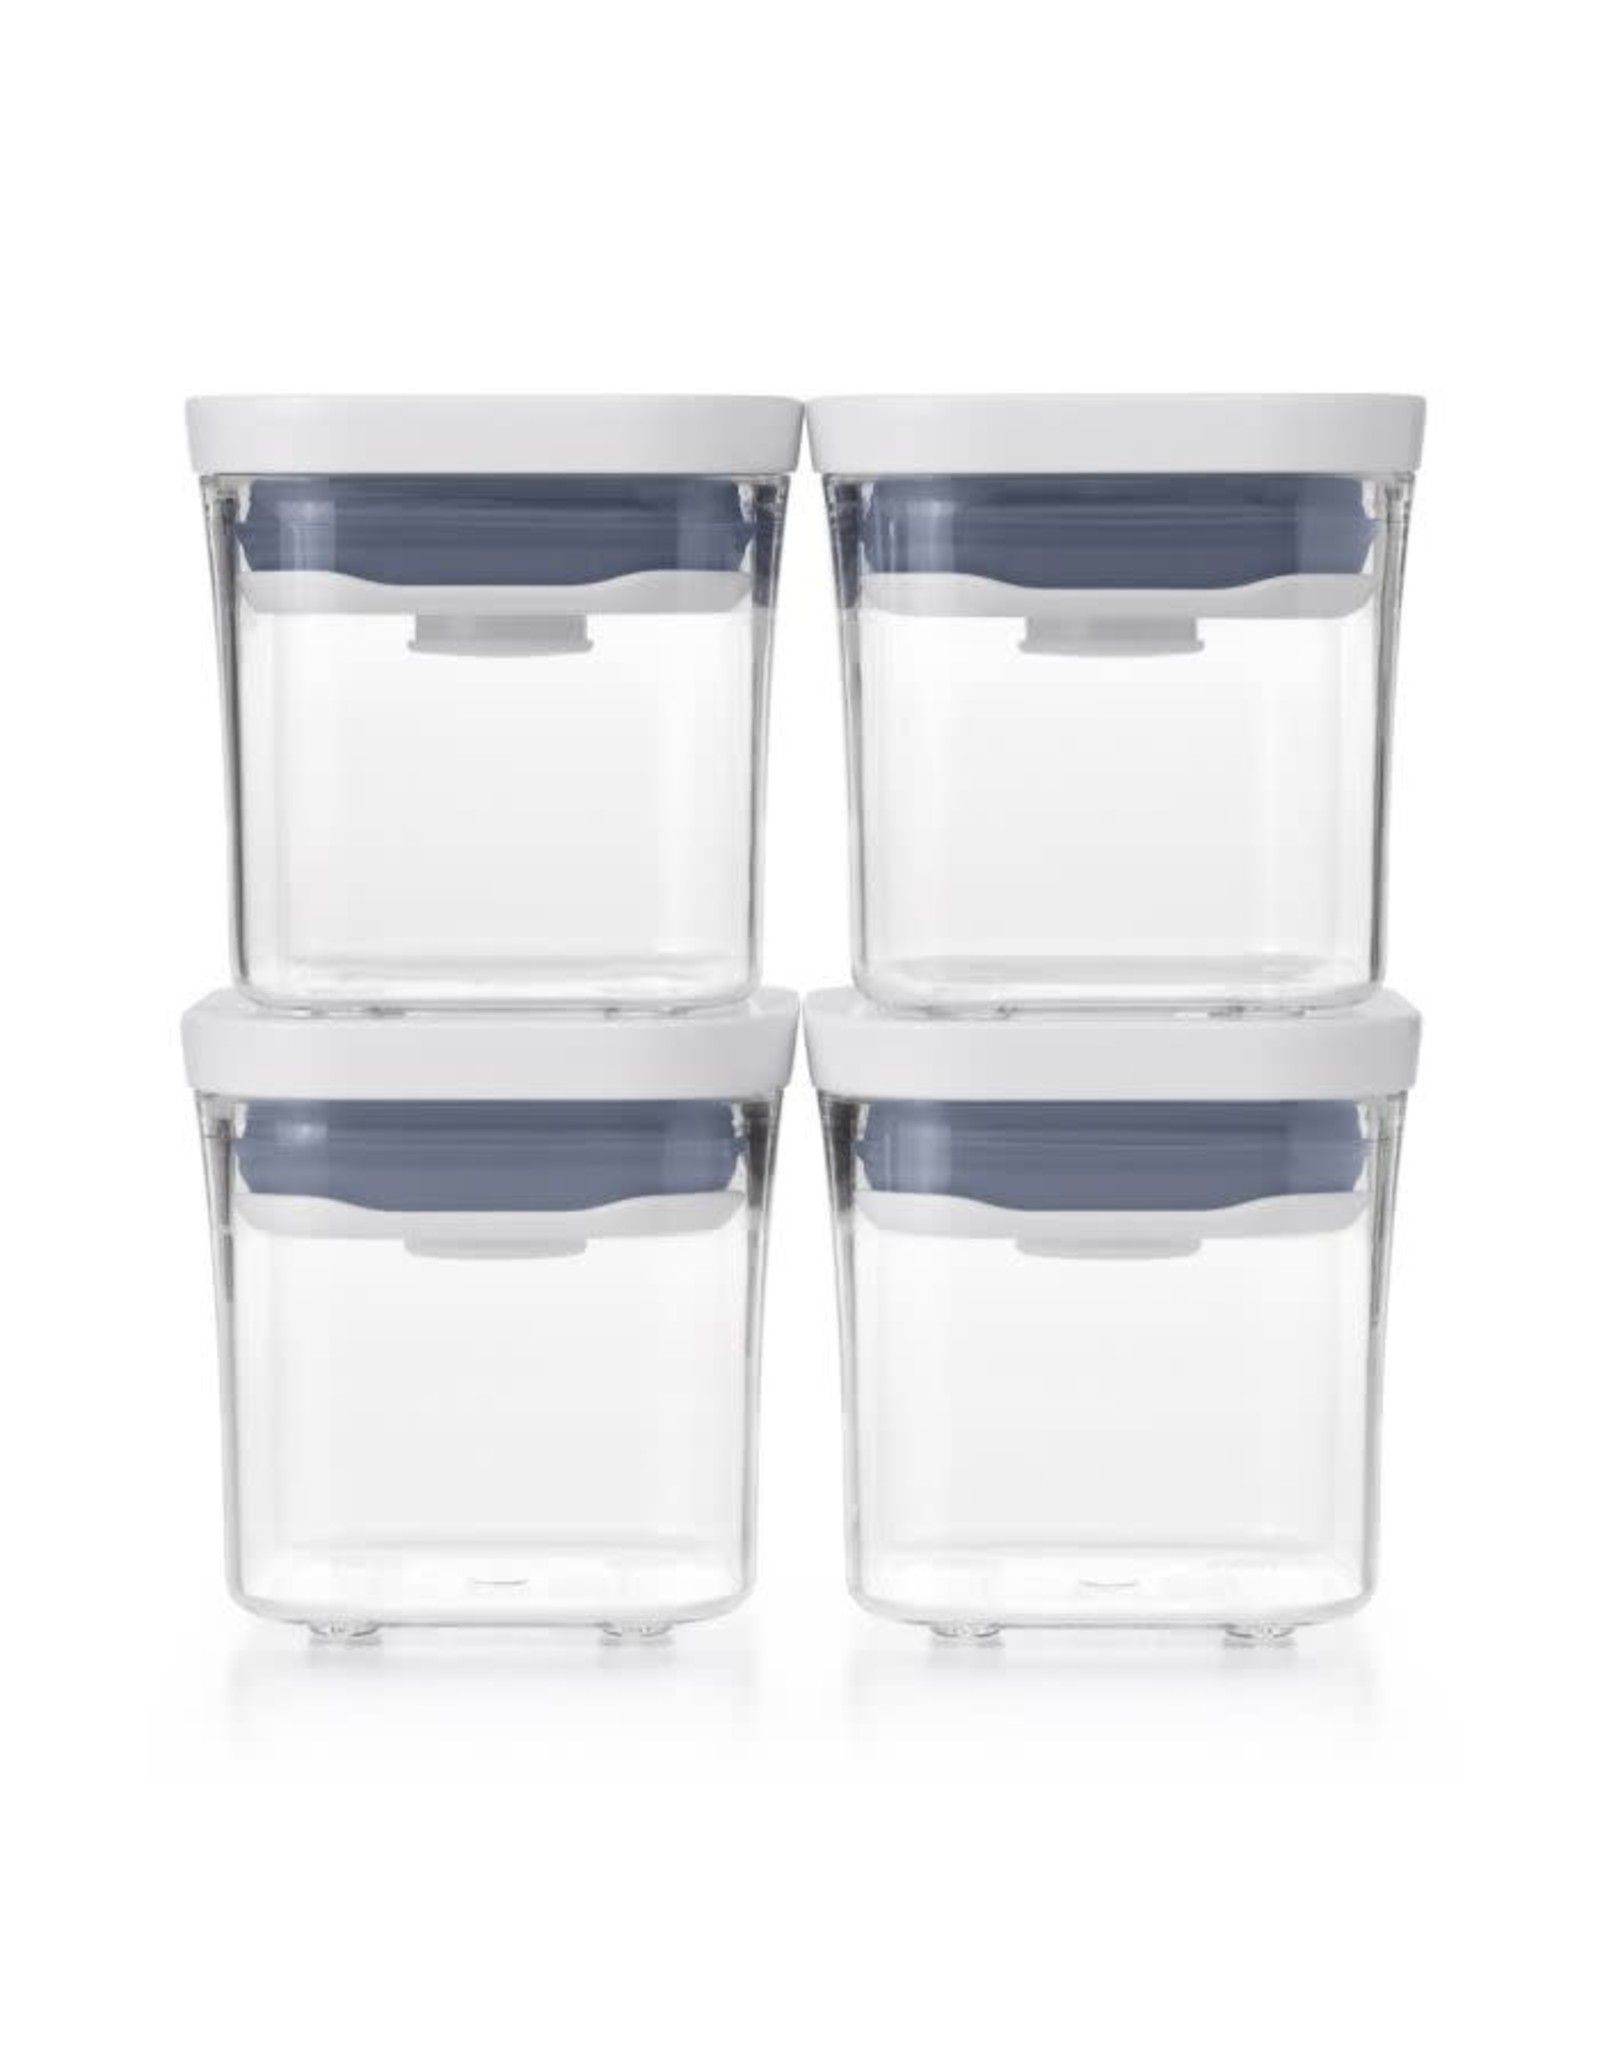 OXO Good Grips POP Container (Three-Piece Rectangle Set with Scoop)